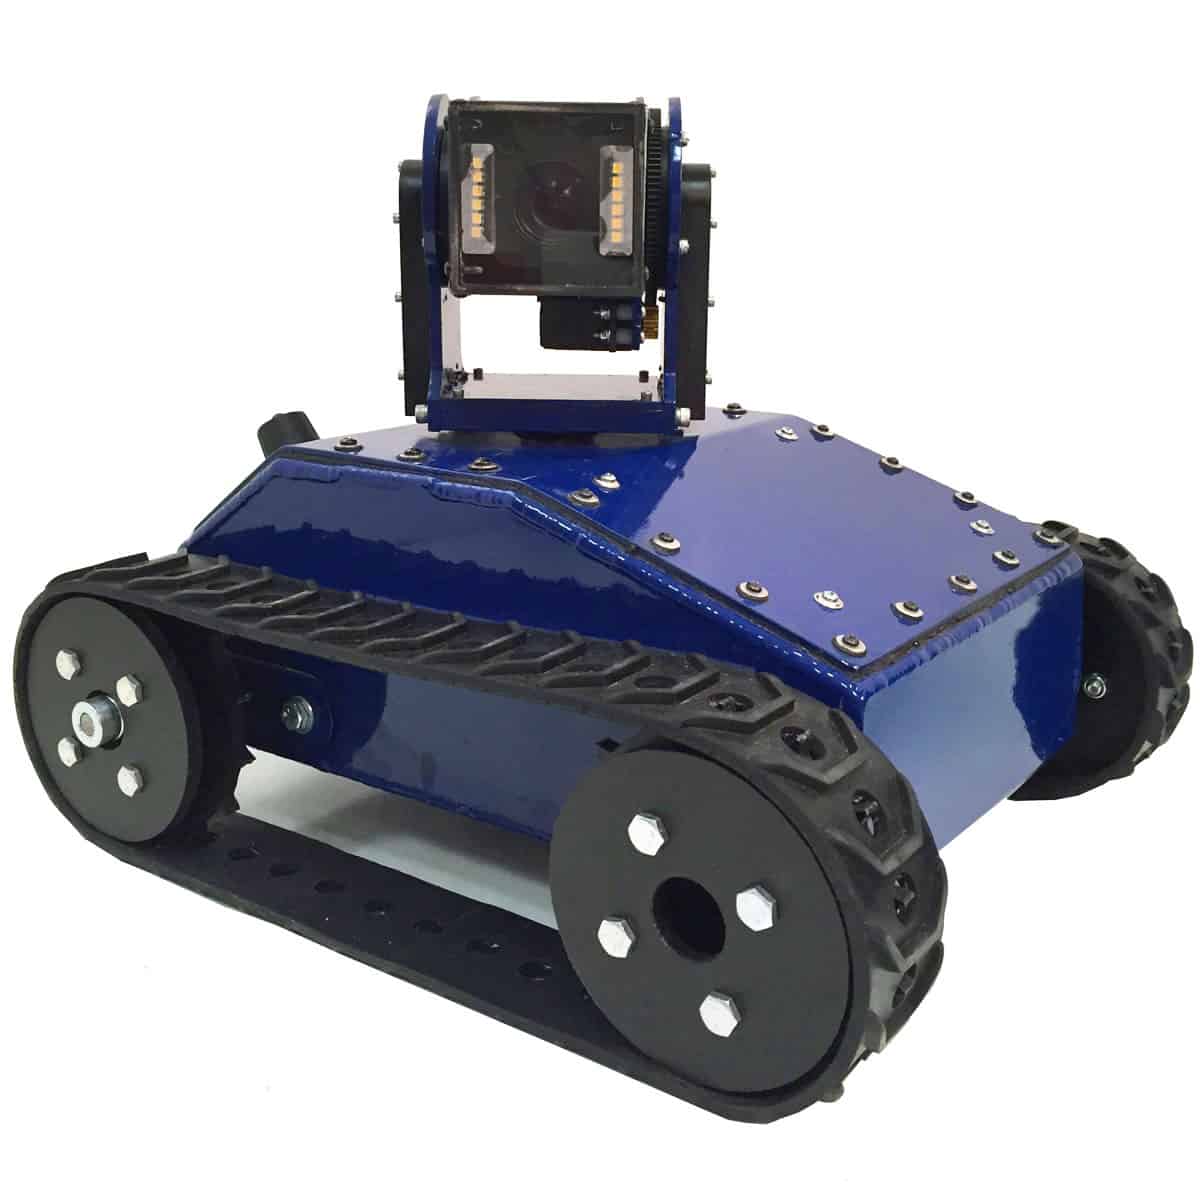 MLT-42-W Watertight Compact Inspection Robot with PTZ Camera